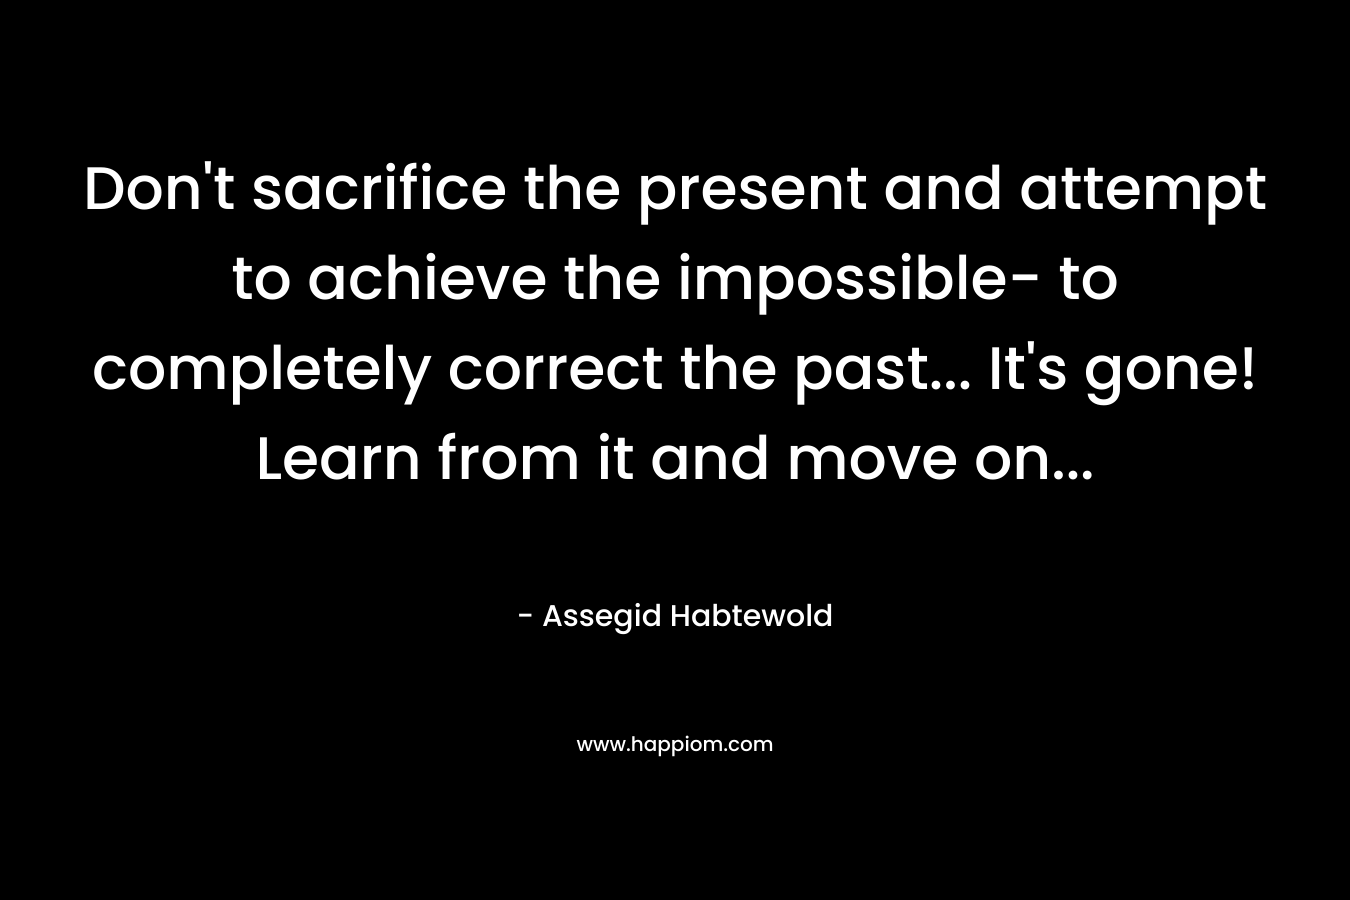 Don’t sacrifice the present and attempt to achieve the impossible- to completely correct the past… It’s gone! Learn from it and move on… – Assegid Habtewold